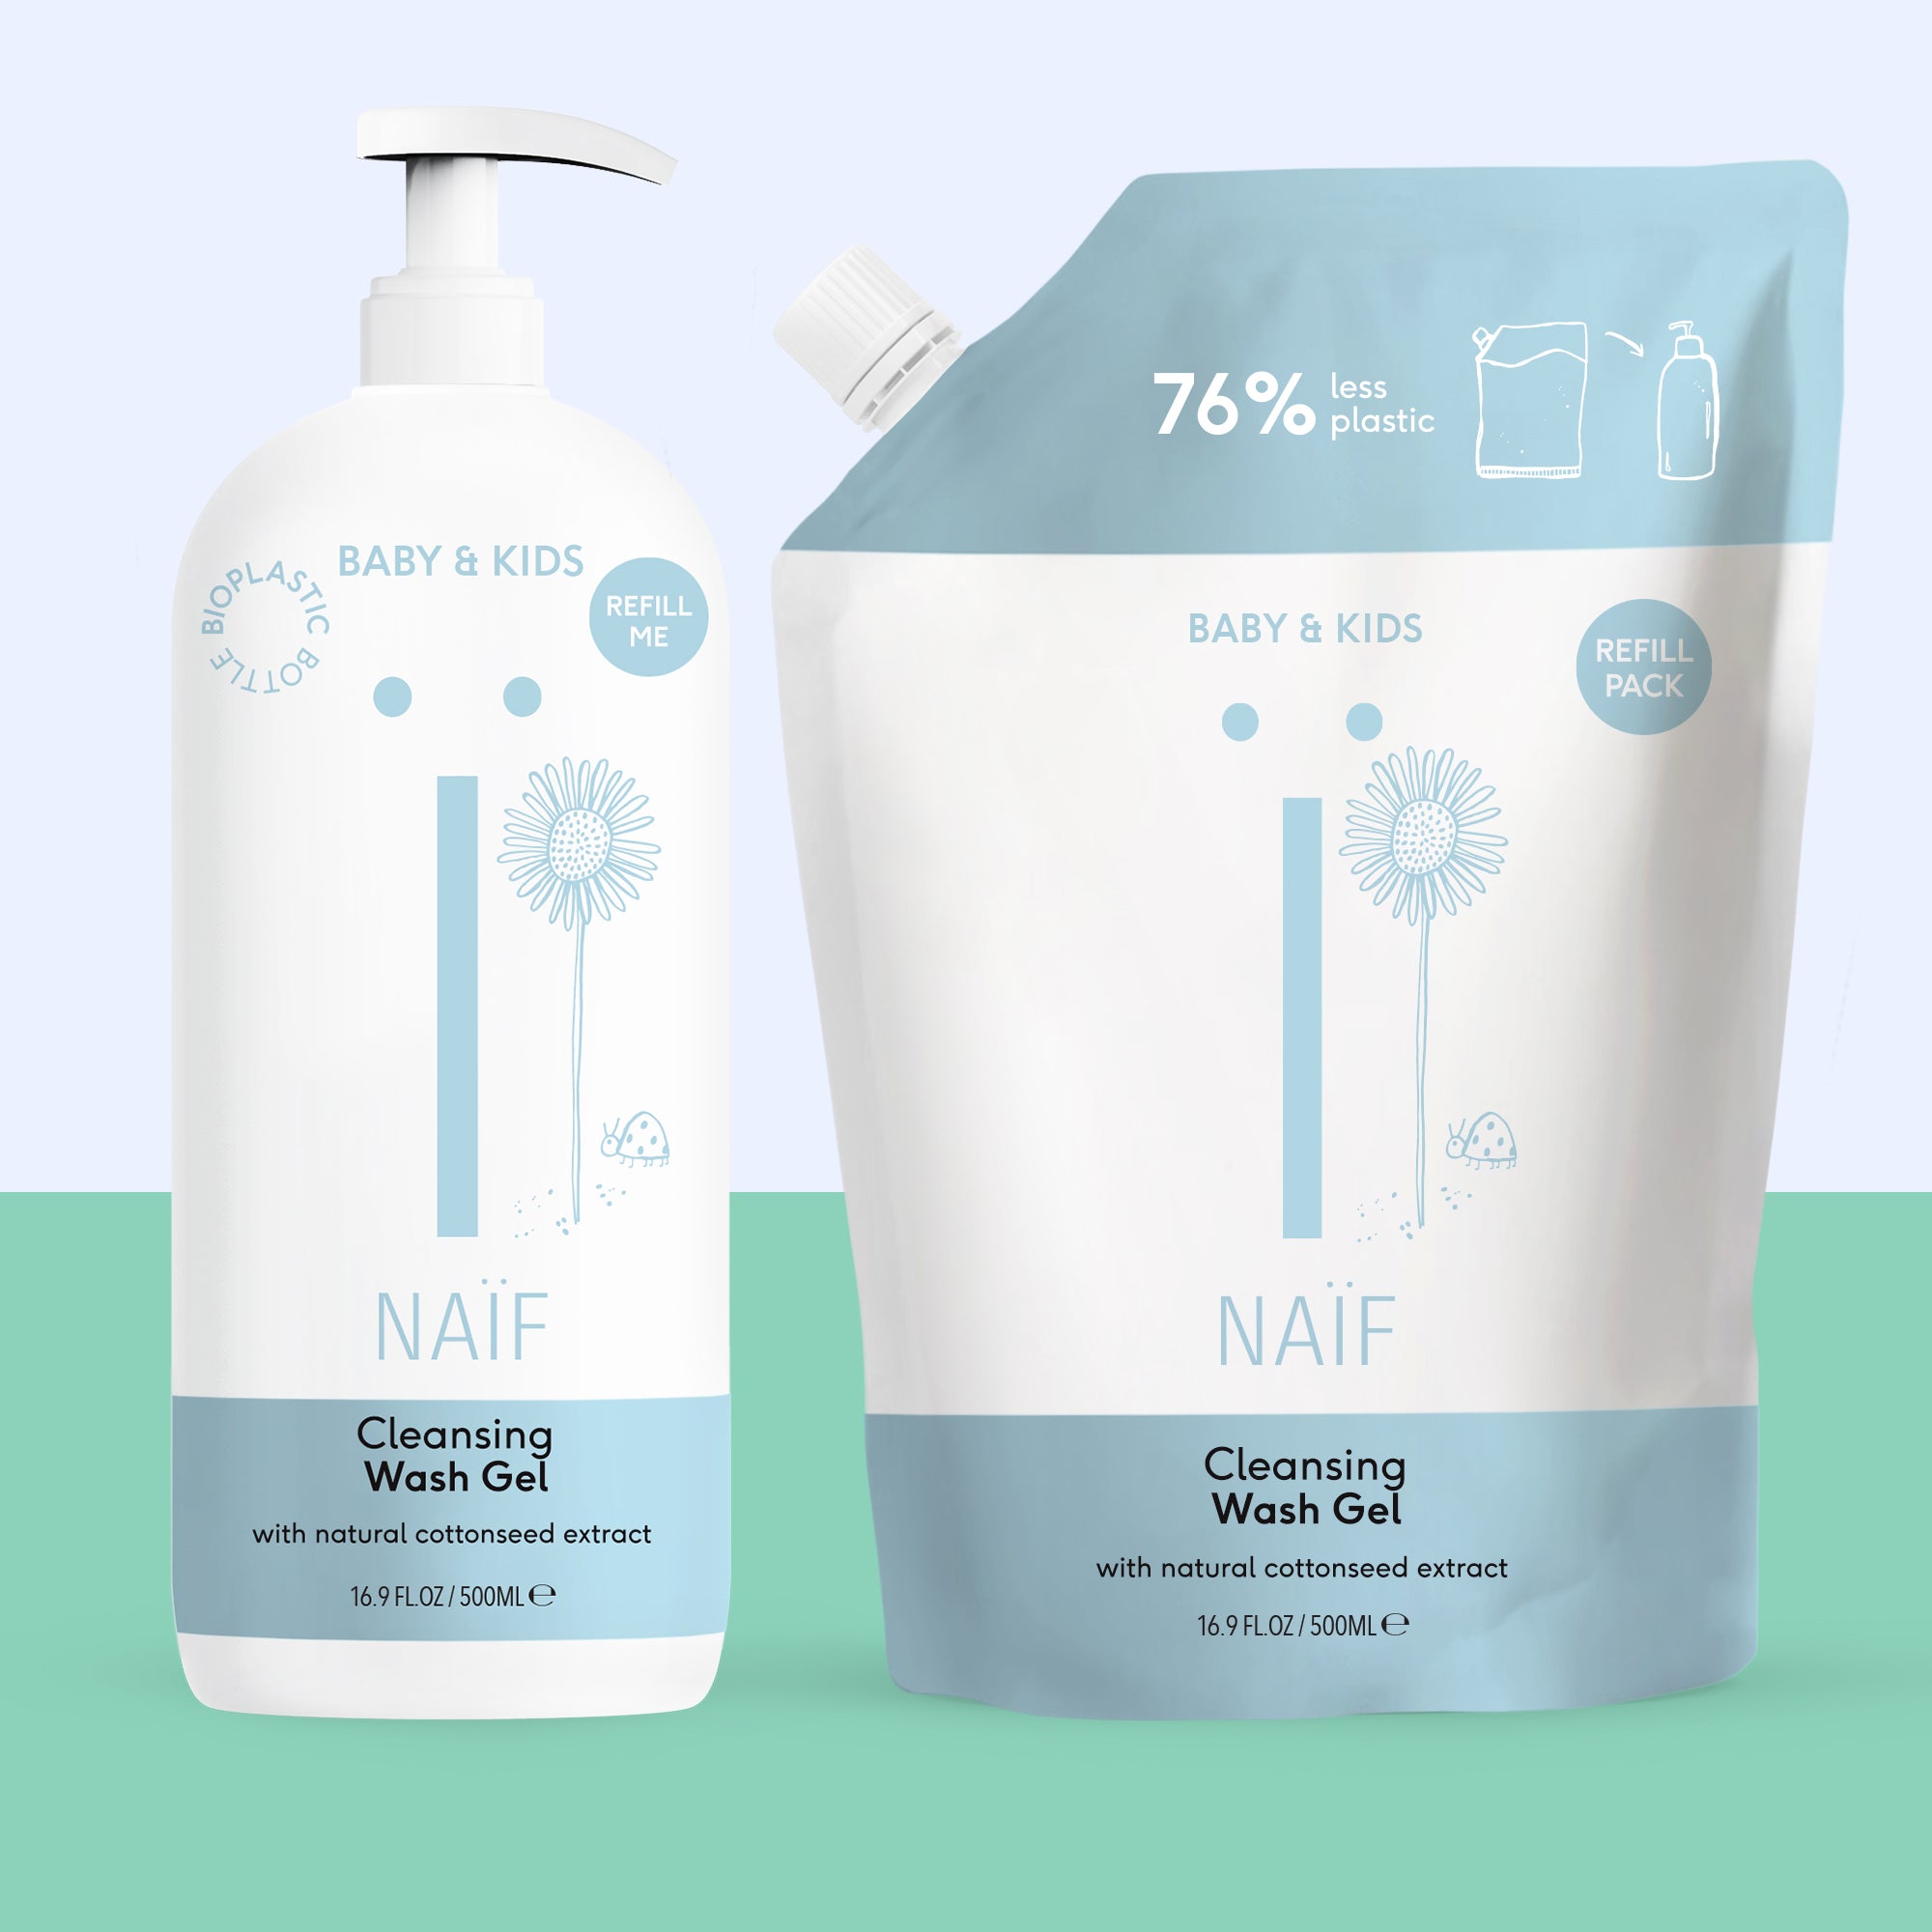 Cleansing Wash Gel and Refill Pack for Baby & Kids